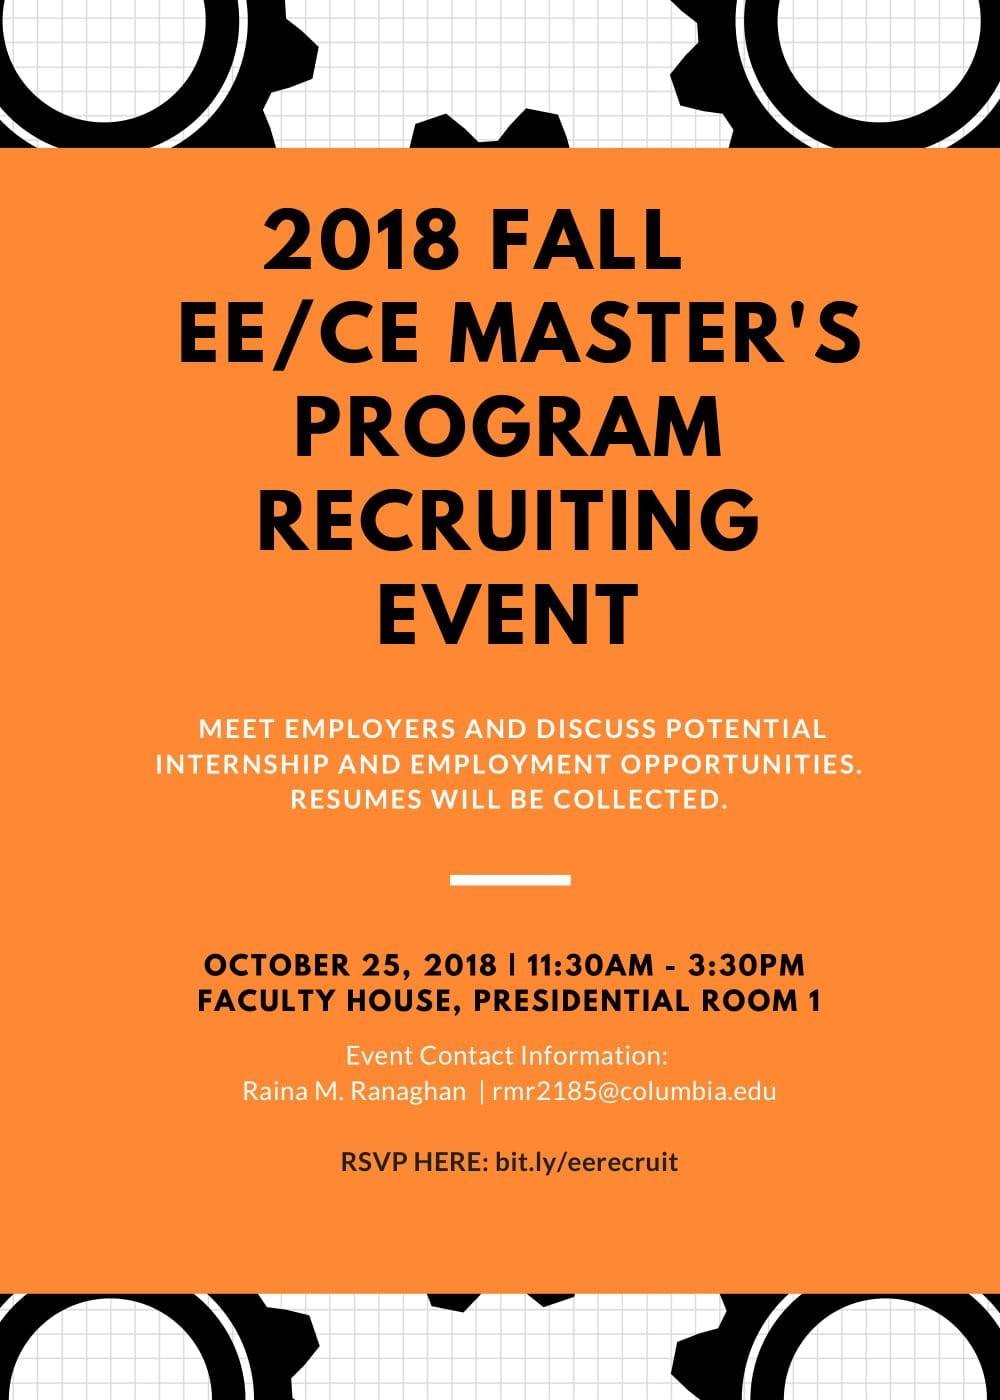 2018 Fall EE/CE Master's Program Recruiting Event Flyer